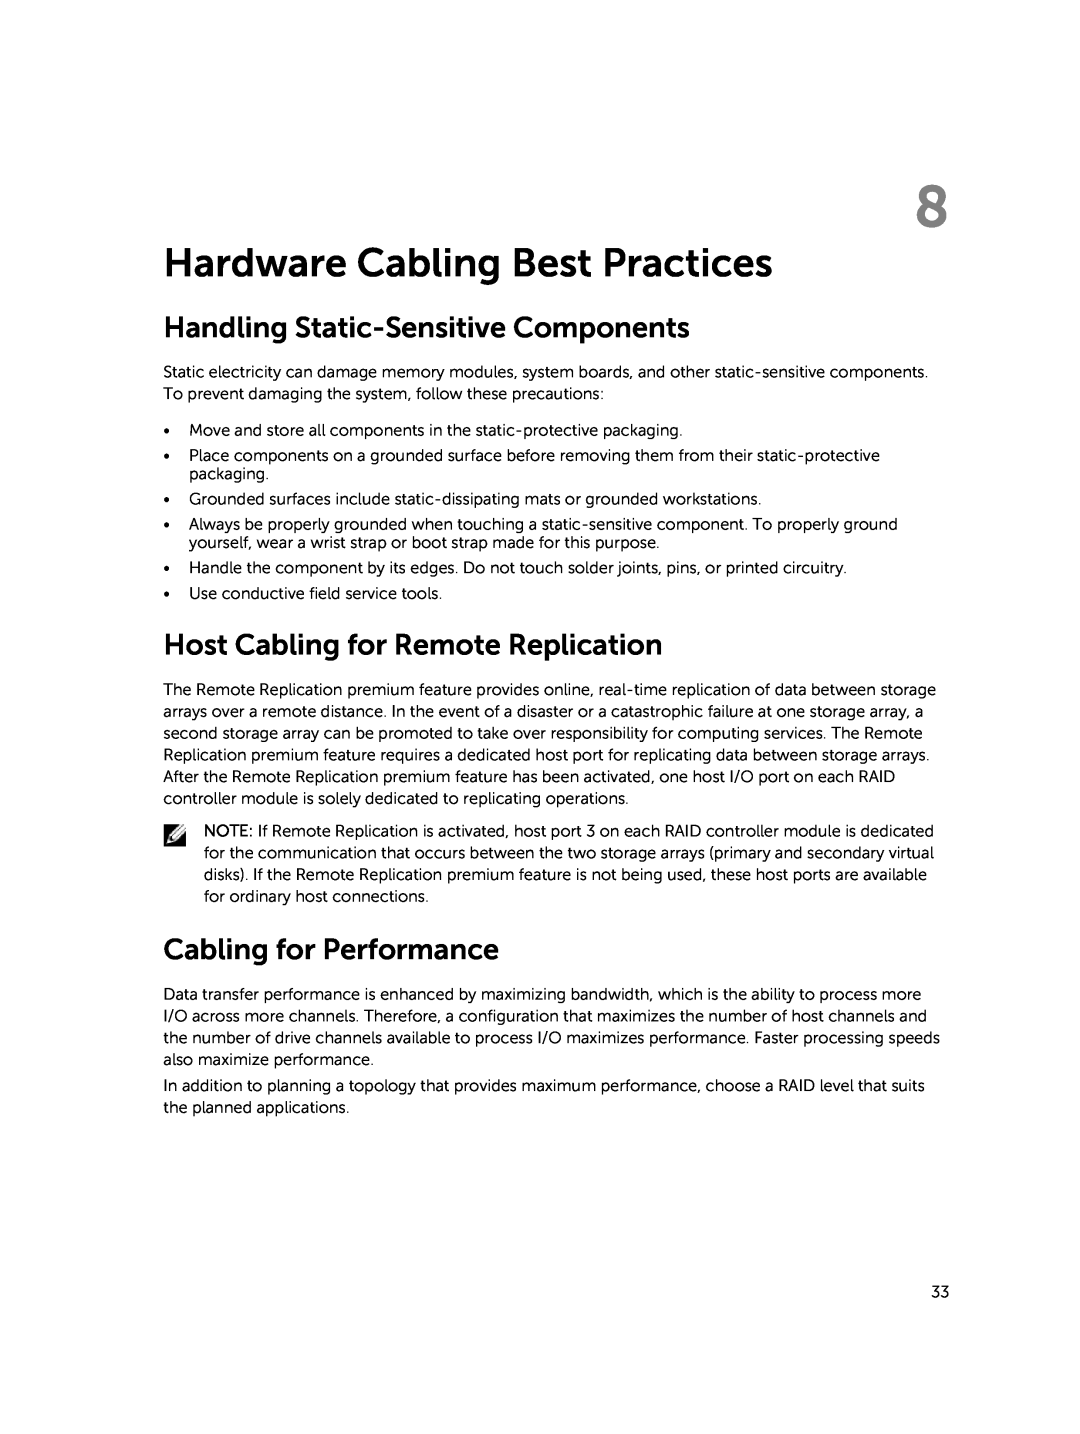 Dell MD3800f Hardware Cabling Best Practices, Handling Static-Sensitive Components, Host Cabling for Remote Replication 